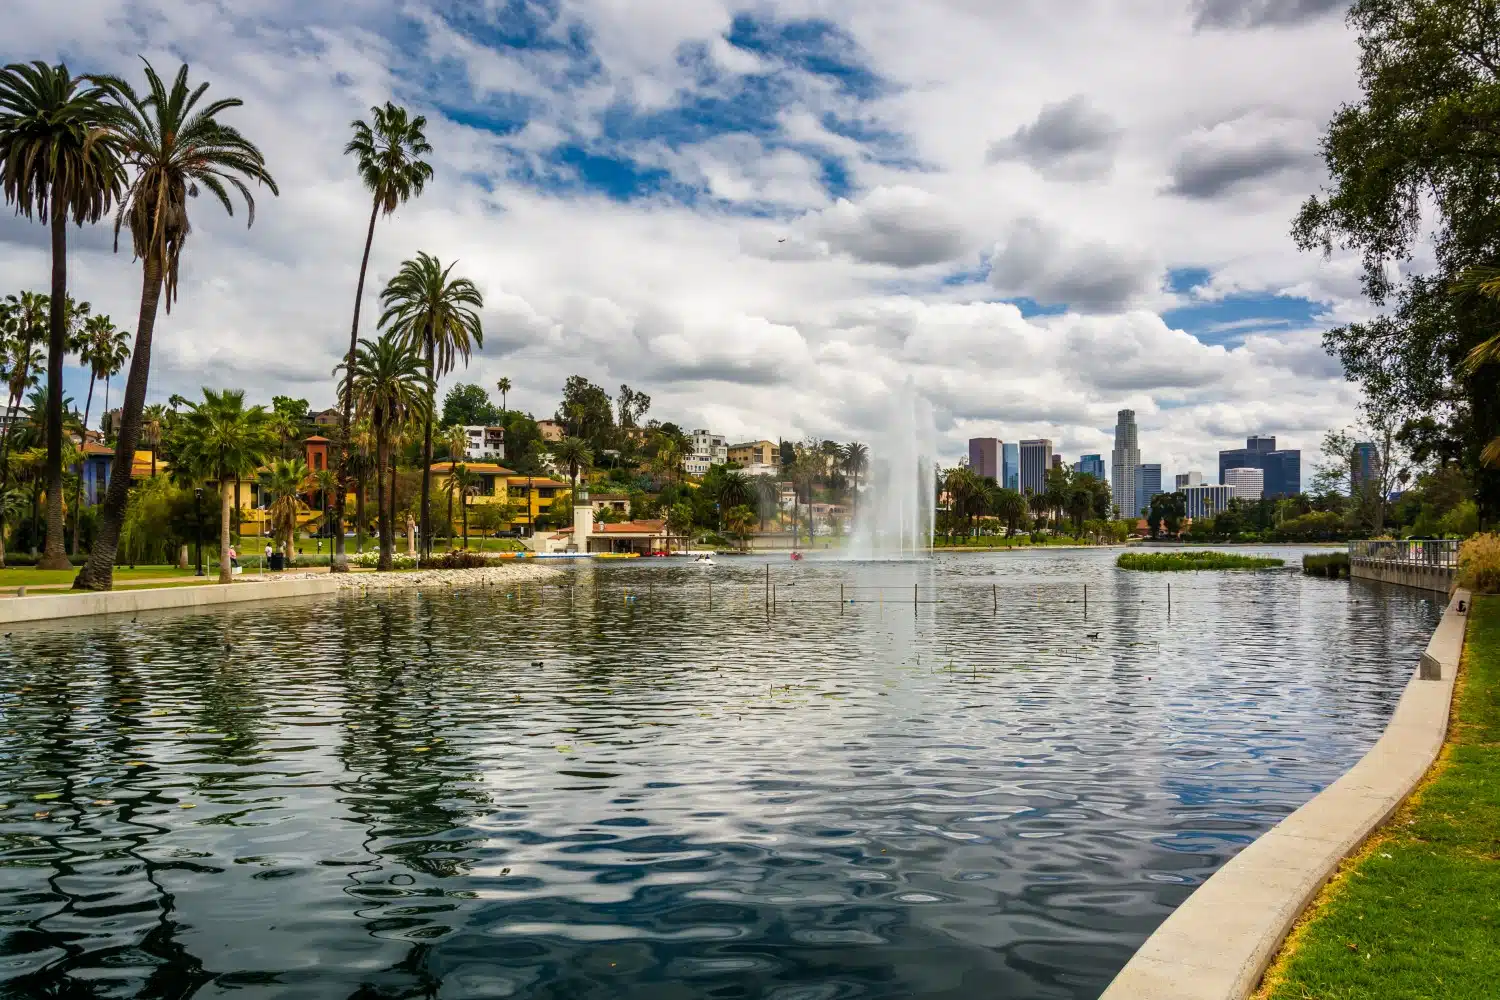 Echo Park Lake is One of the Coolest Places to Spend Time in LA. Click to Check out Our Travel Guide to Cool LA. 